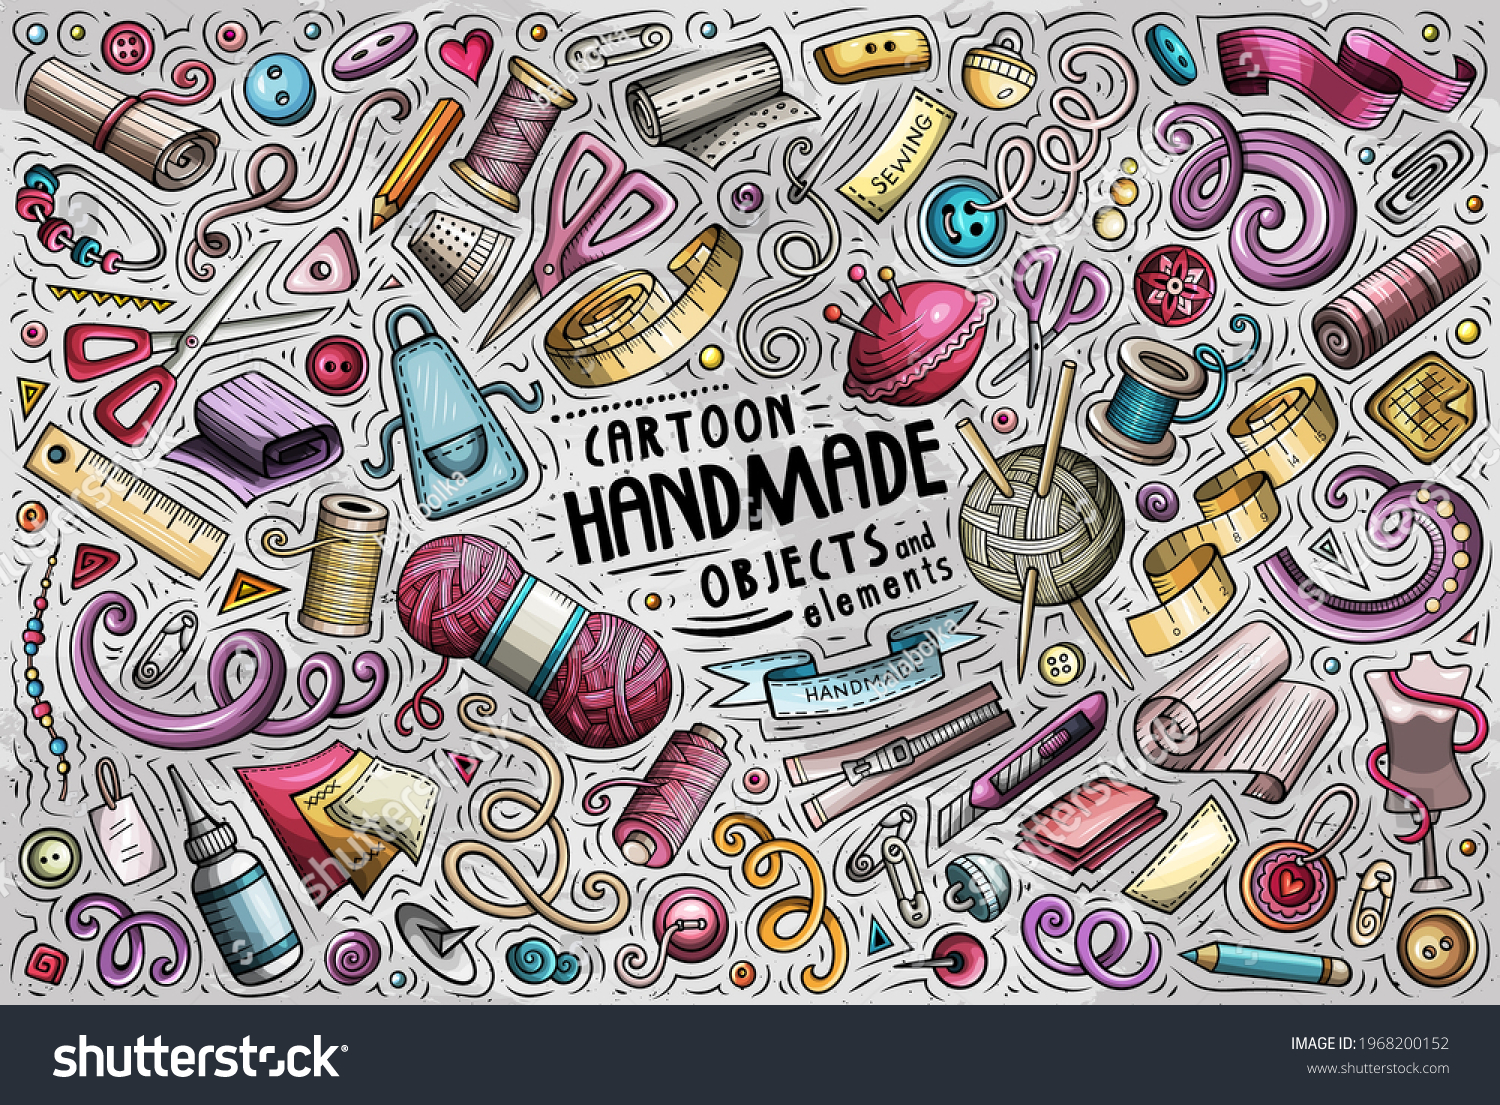 Colorful Vector Hand Drawn Doodle Cartoon Stock Vector (Royalty Free ...